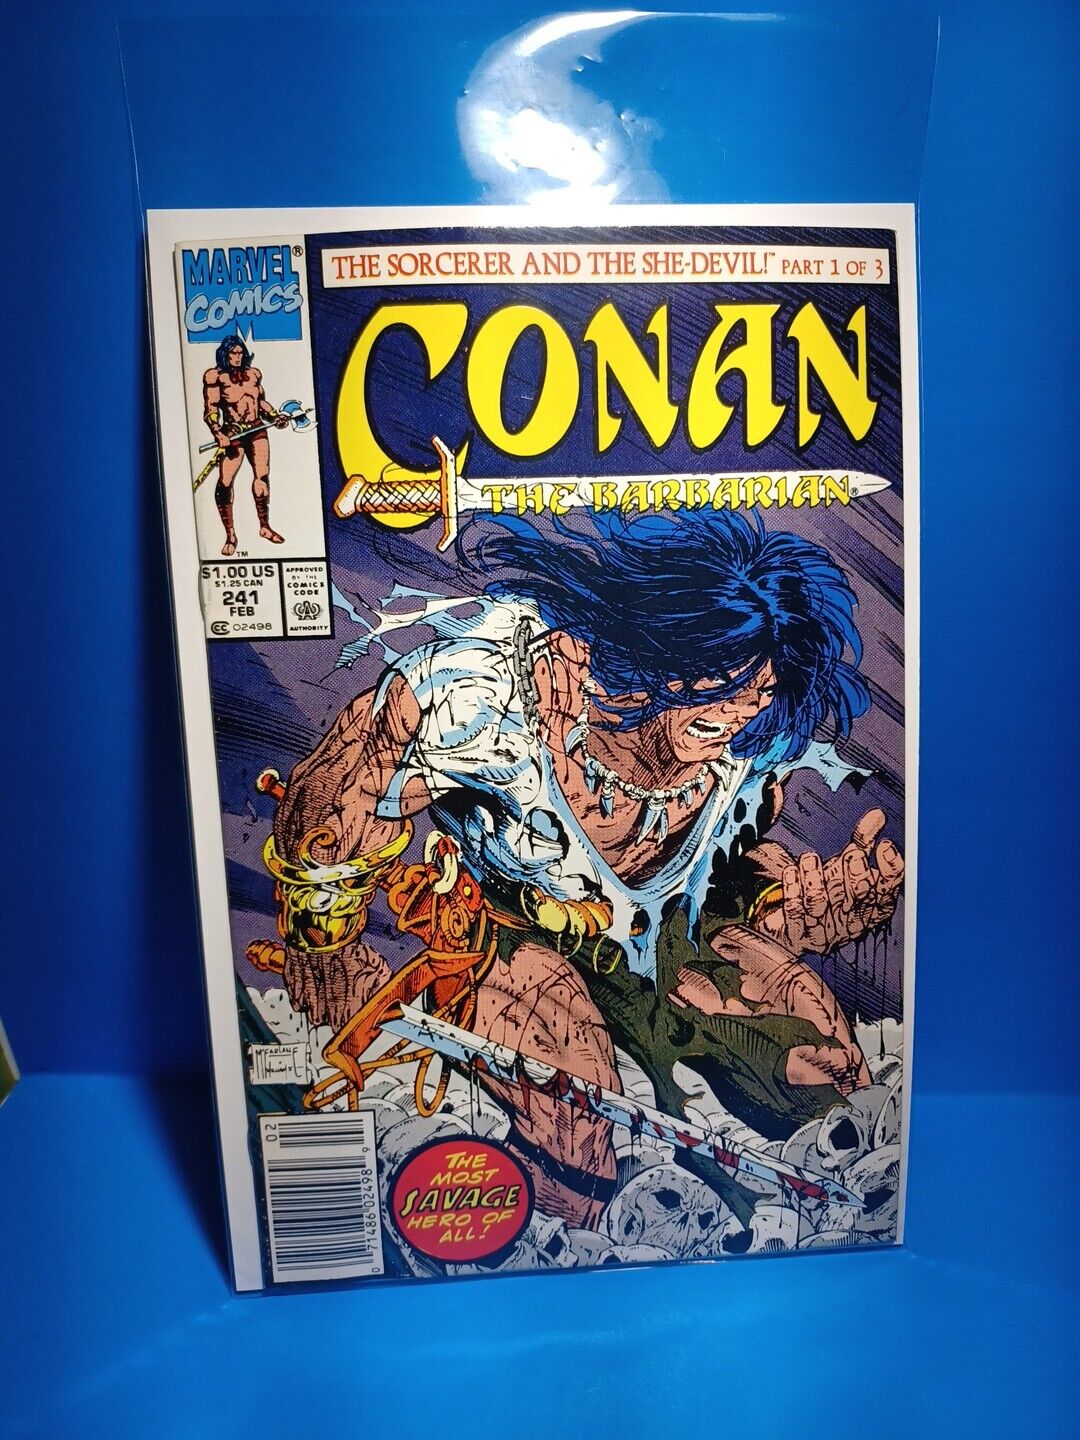 Conan The Barbarian # 241 Newsstand Key Todd McFarlane Classic Cover 1991 Marvel